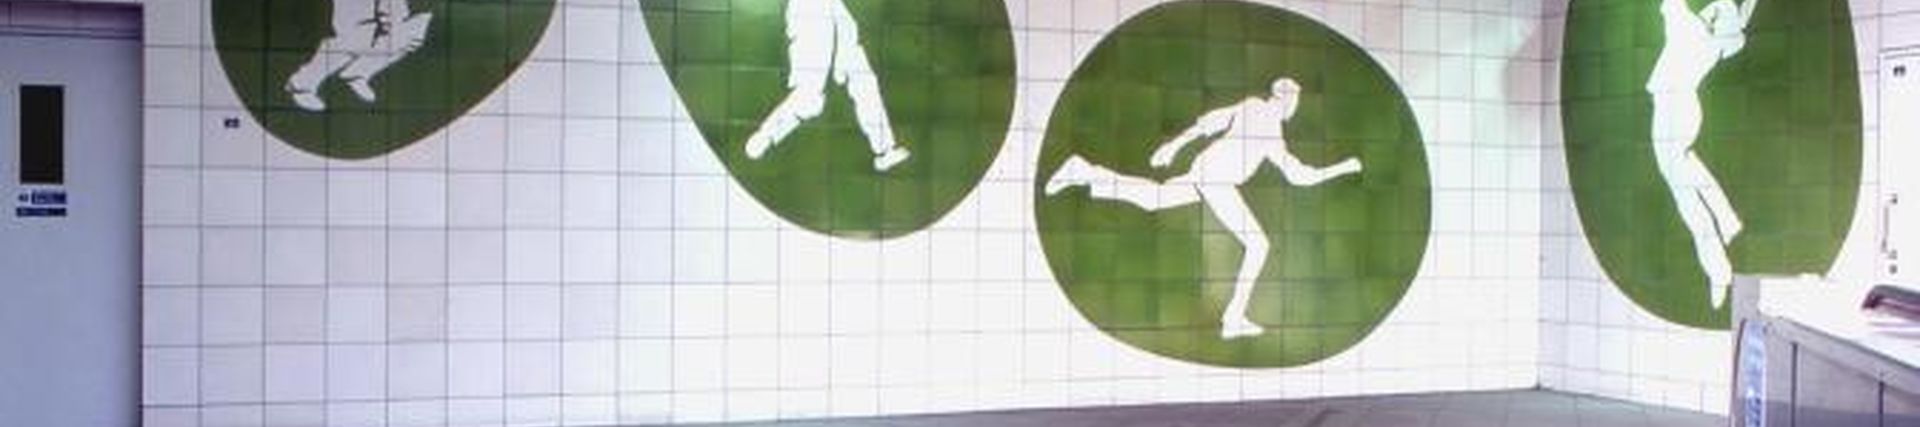 The hall of Oval station with white and green tiles depicting cricket players